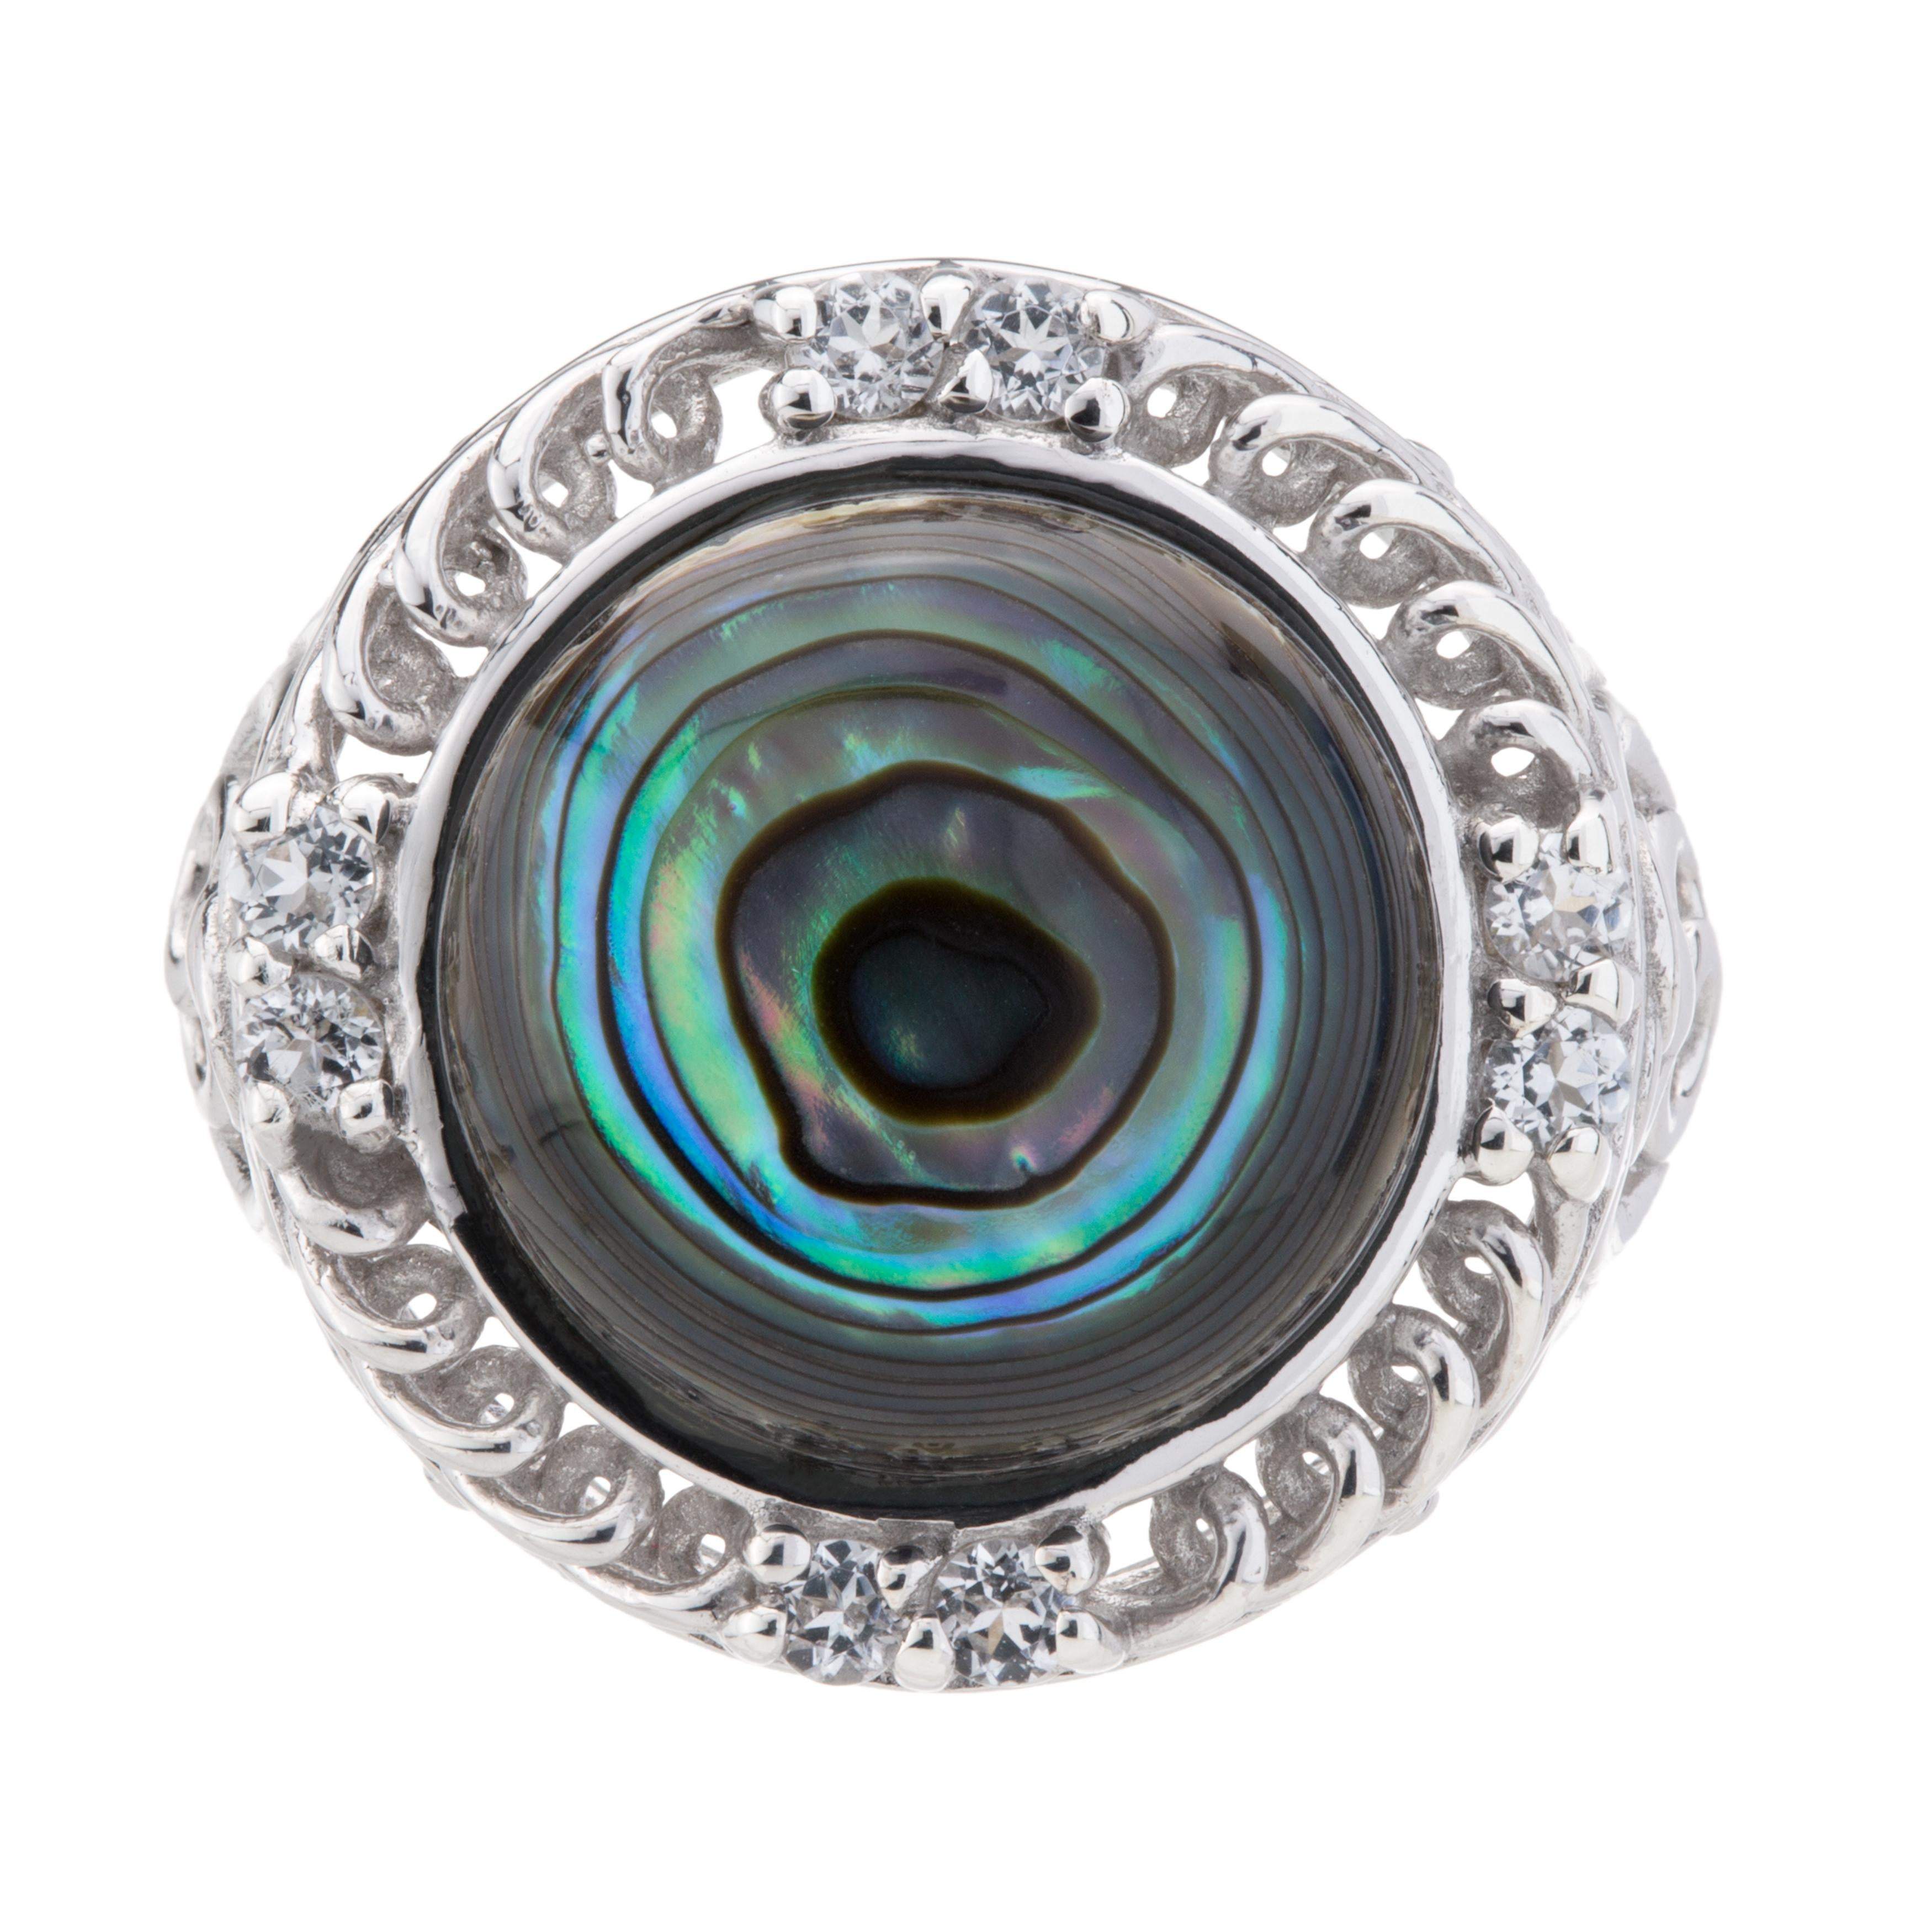 Silver Abalone & White Topaz Textured Ring-Size 9 - Shop Thrifty Treasures